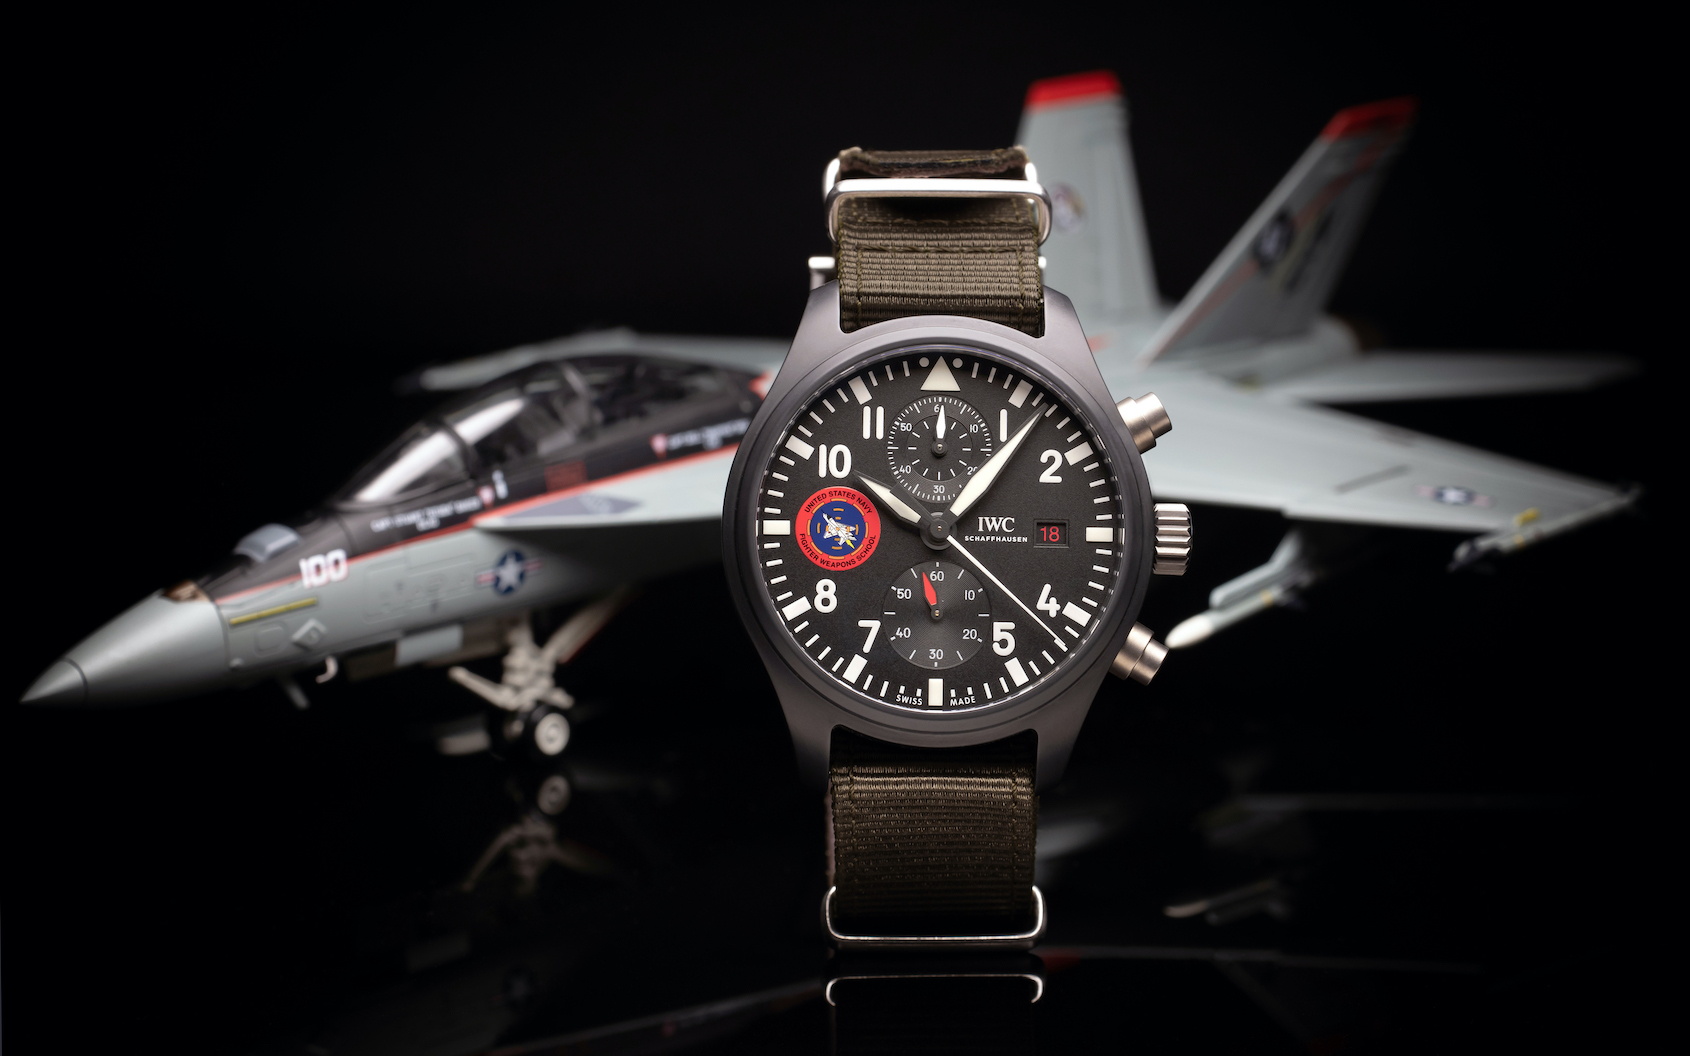 HANDSON Aggressive, unrelenting and tactical, the IWC Pilot’s Watch